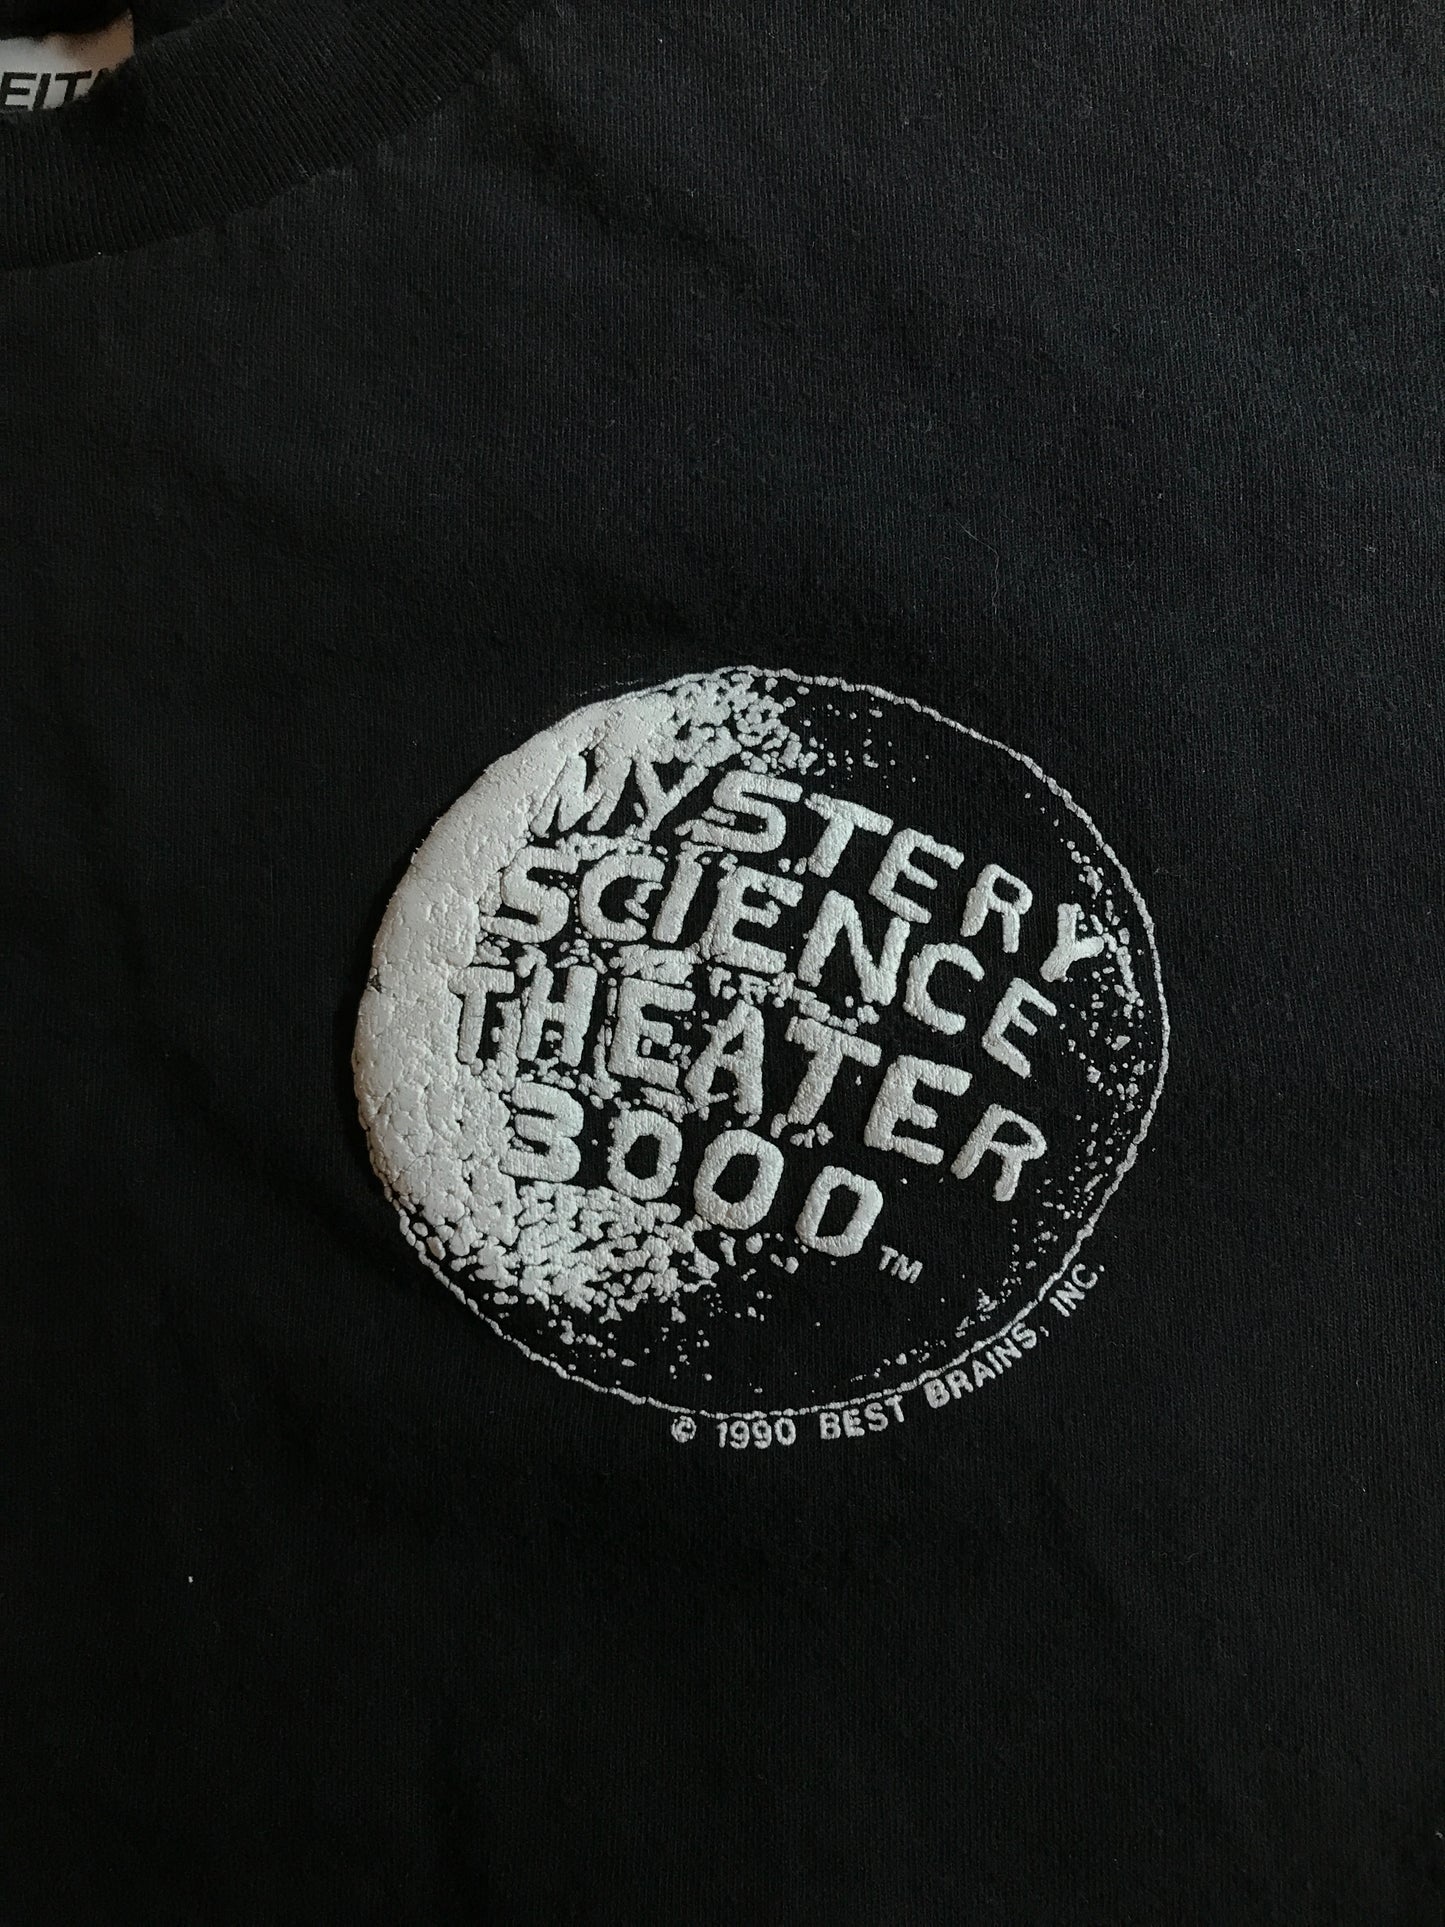 Mystery Science Theater 3000 Vintage T-shirt